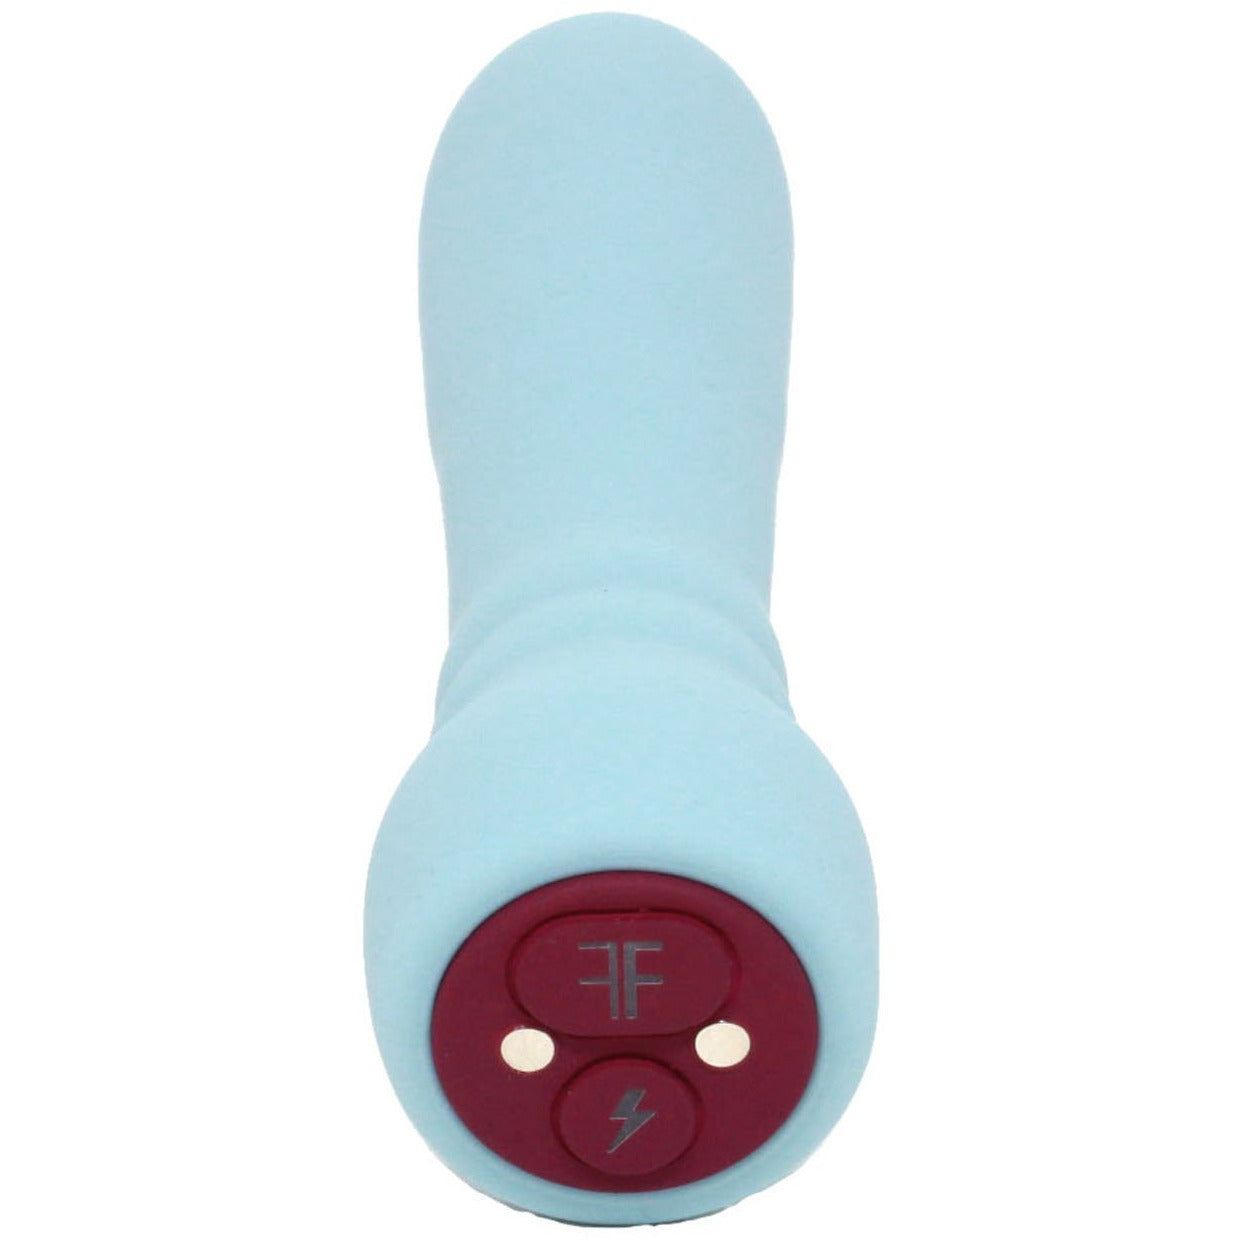 Femme Funn Booster Bullet - The Bigger O - online sex toy shop USA, Canada & UK shipping available